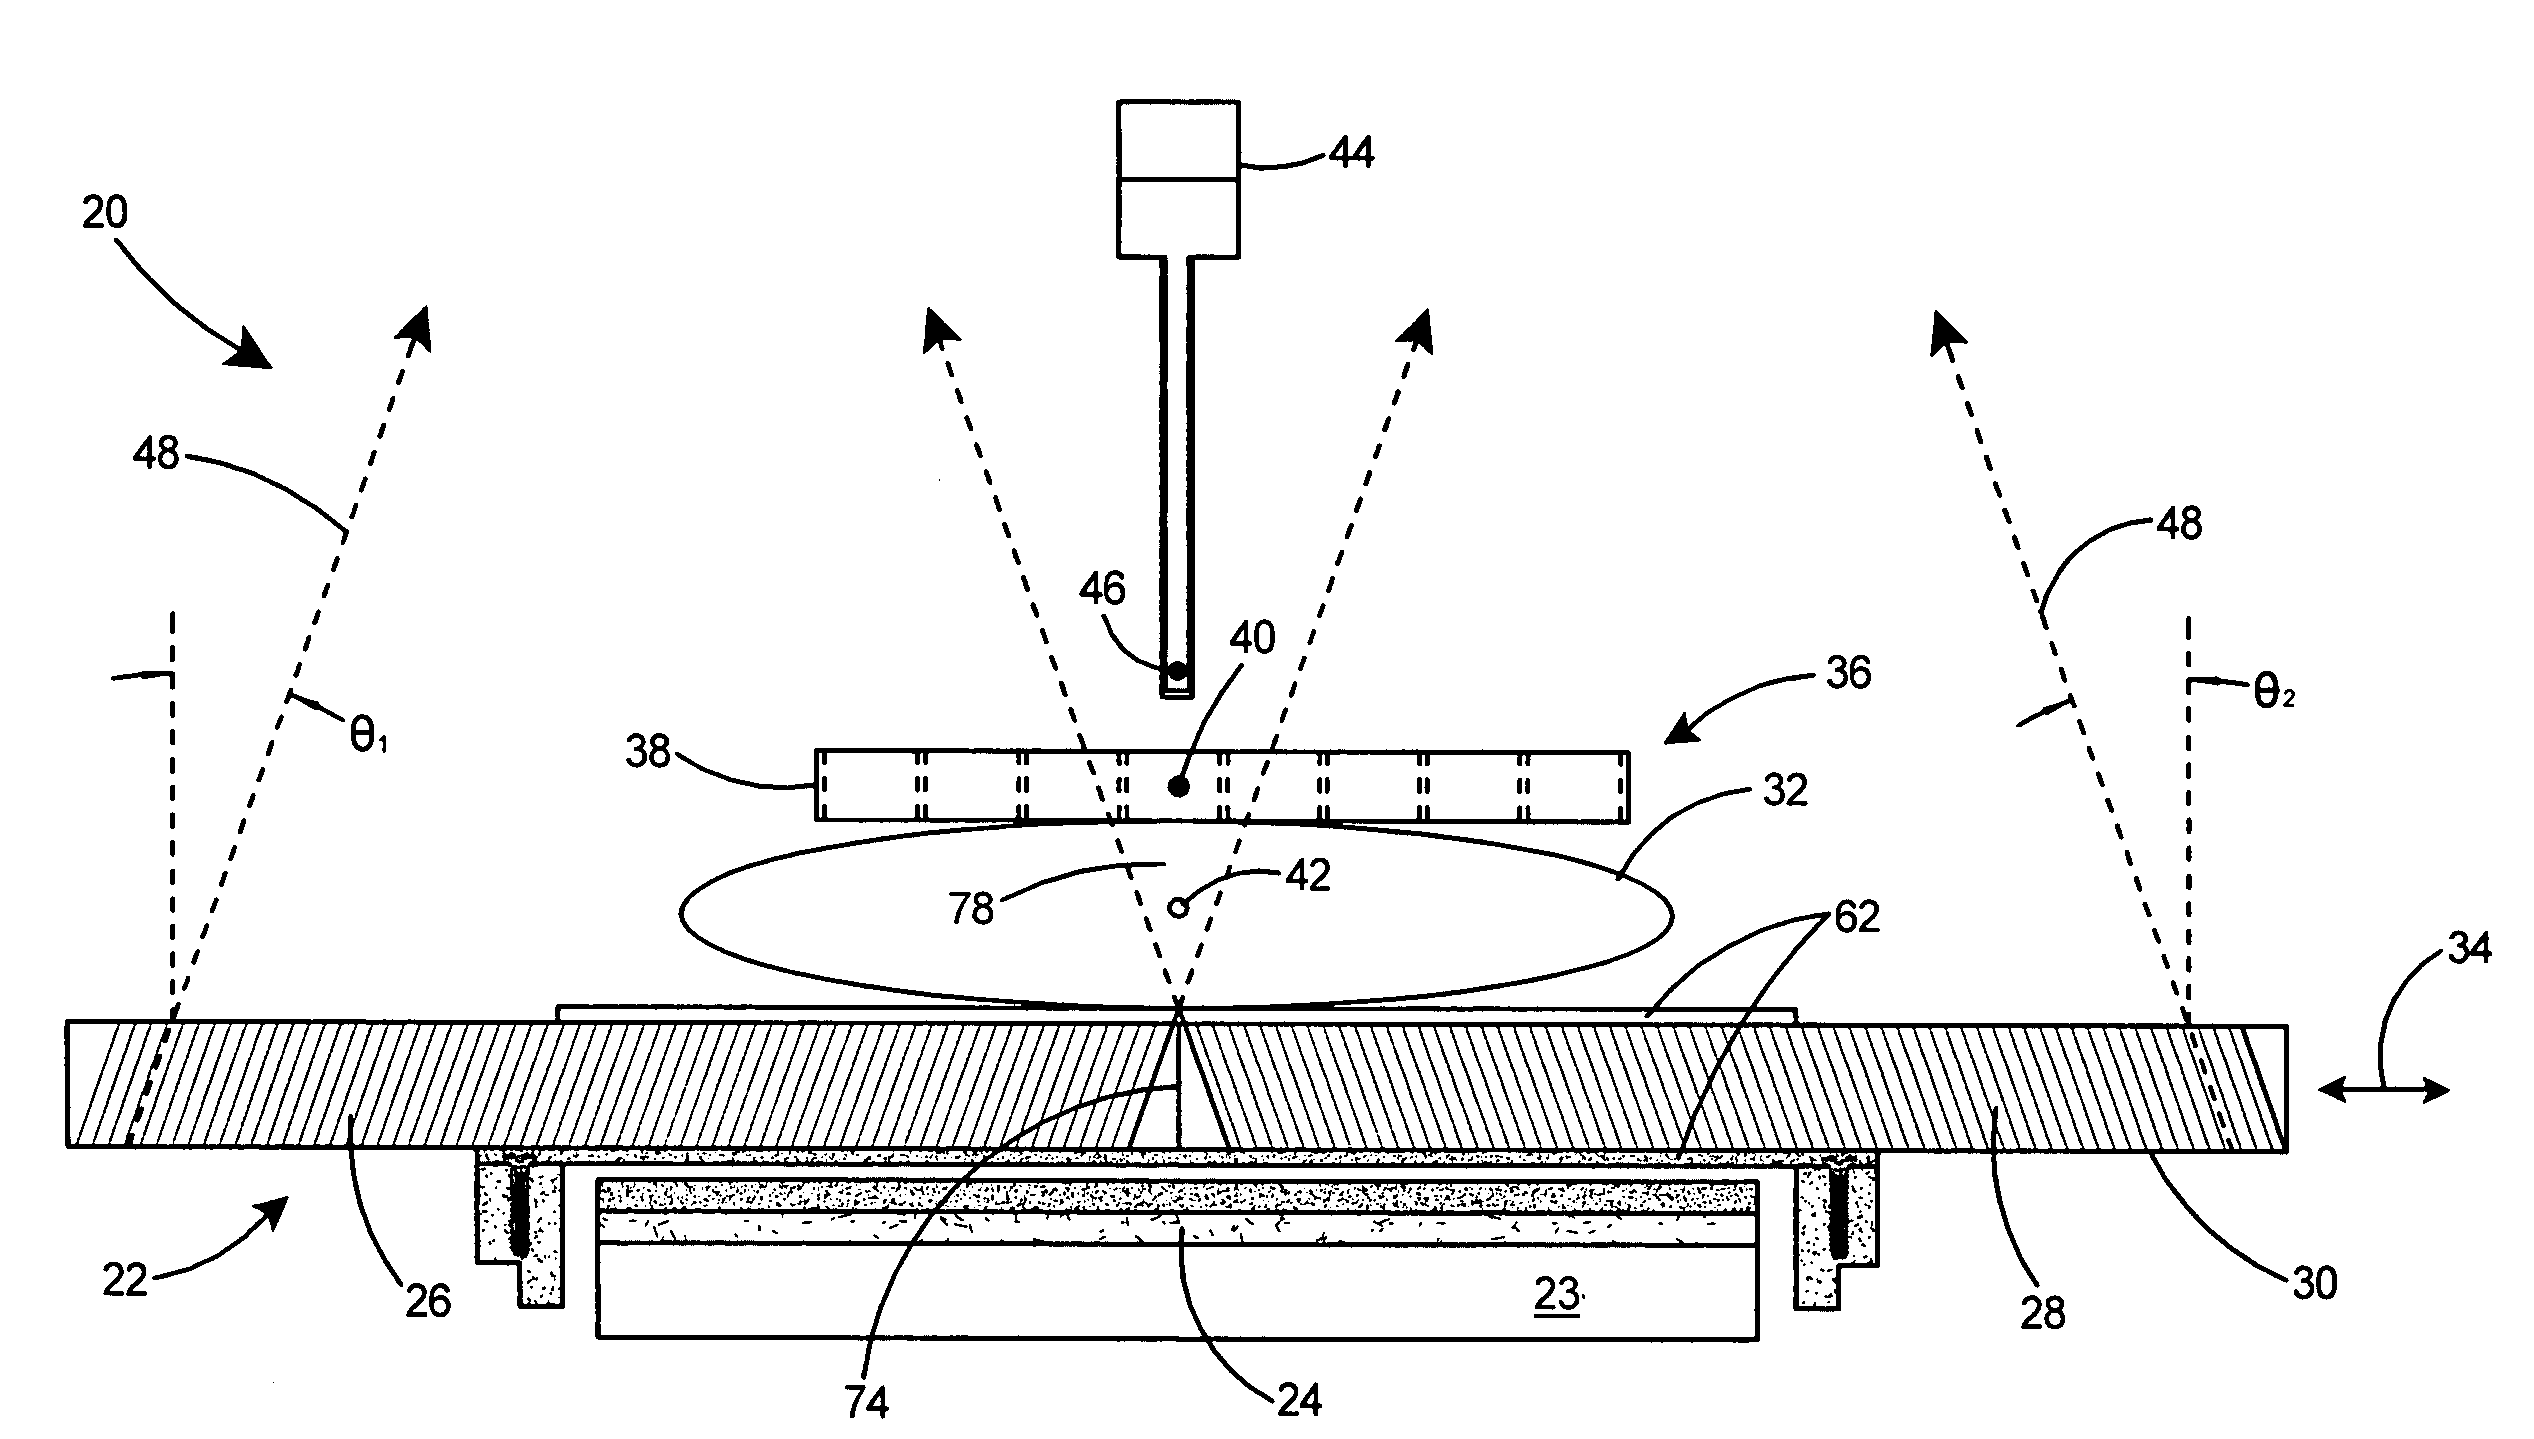 Gamma guided stereotactic localization system